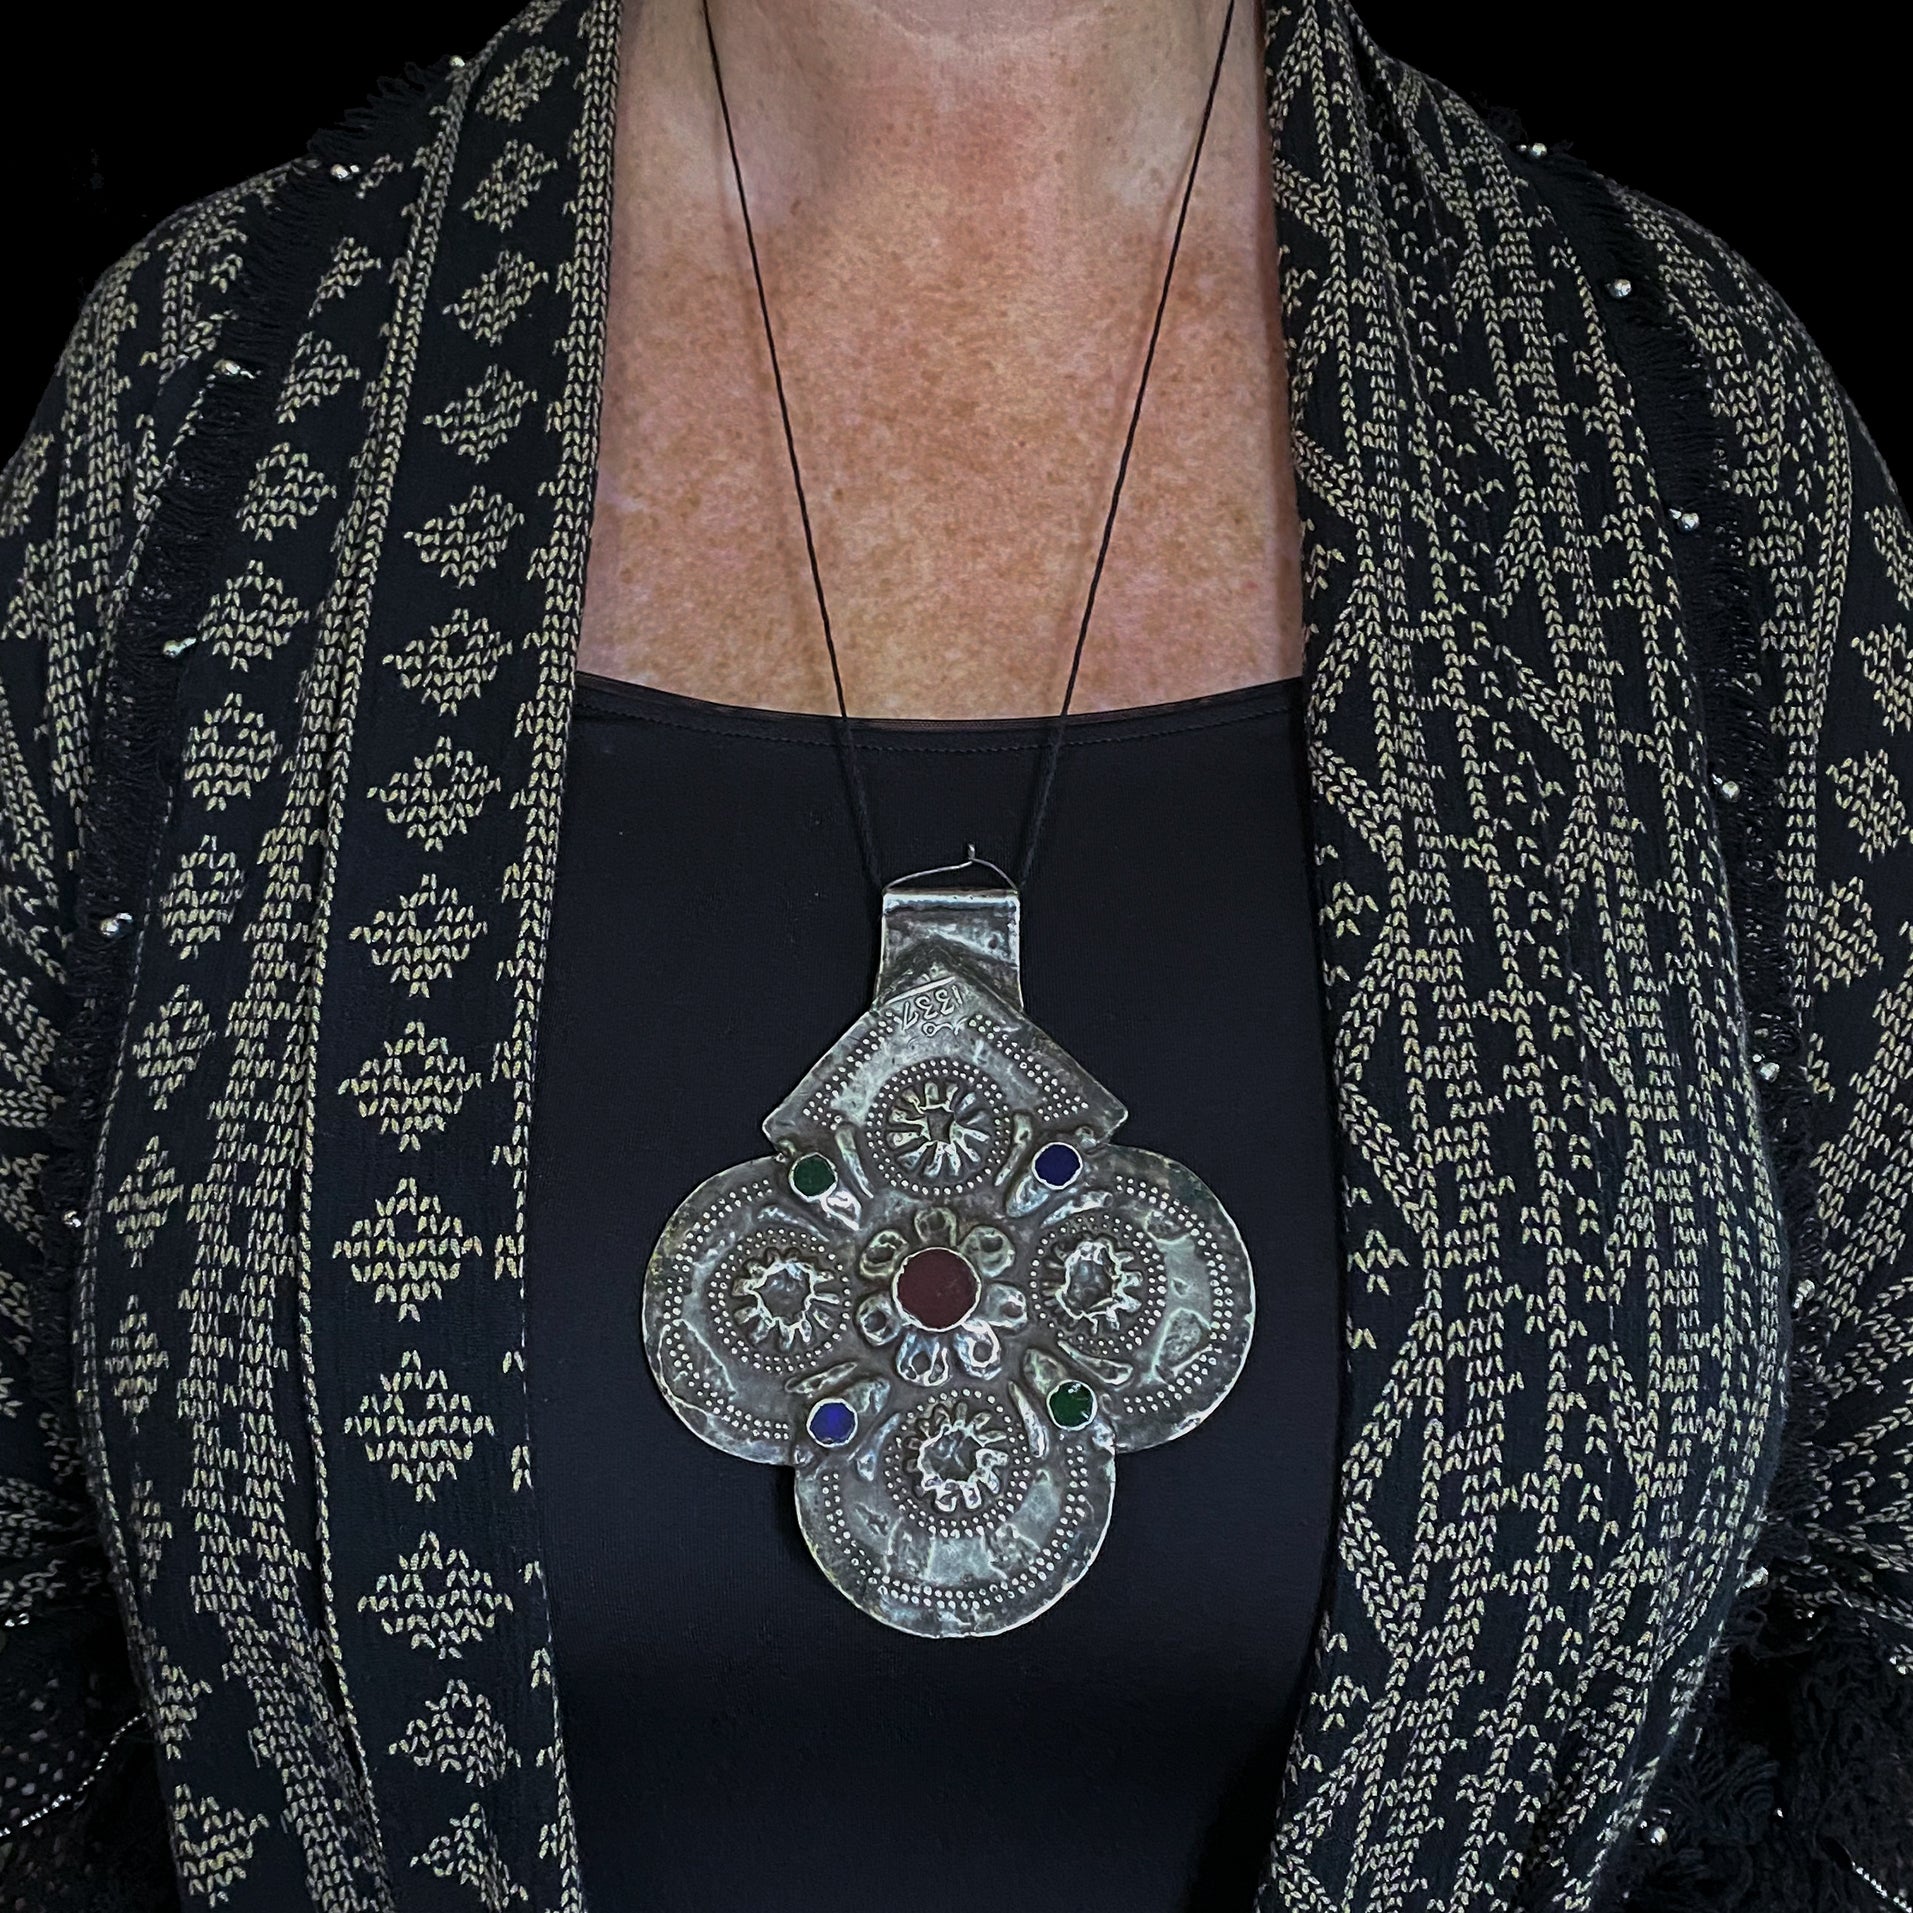 Large Antique Silver ‘Foulet’ Hamsa from Marrakech, Morocco